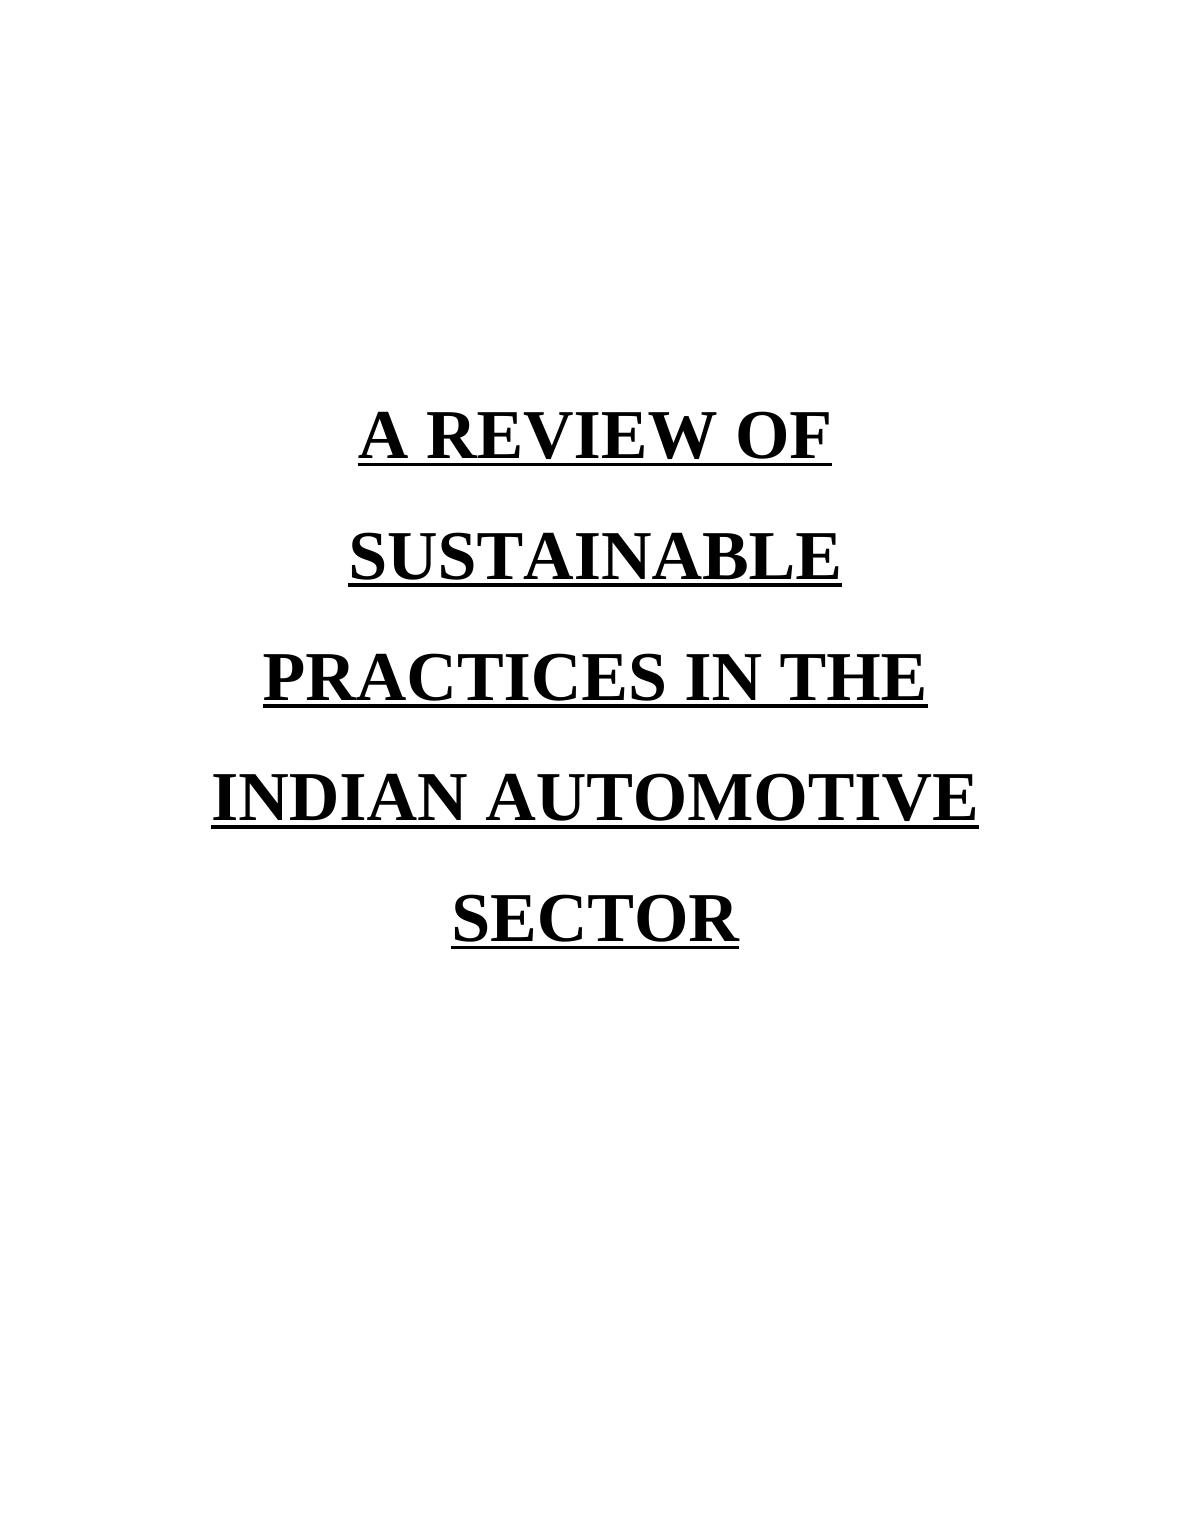 A Review of Sustainable Practices in the Indian Automotive Sector_1